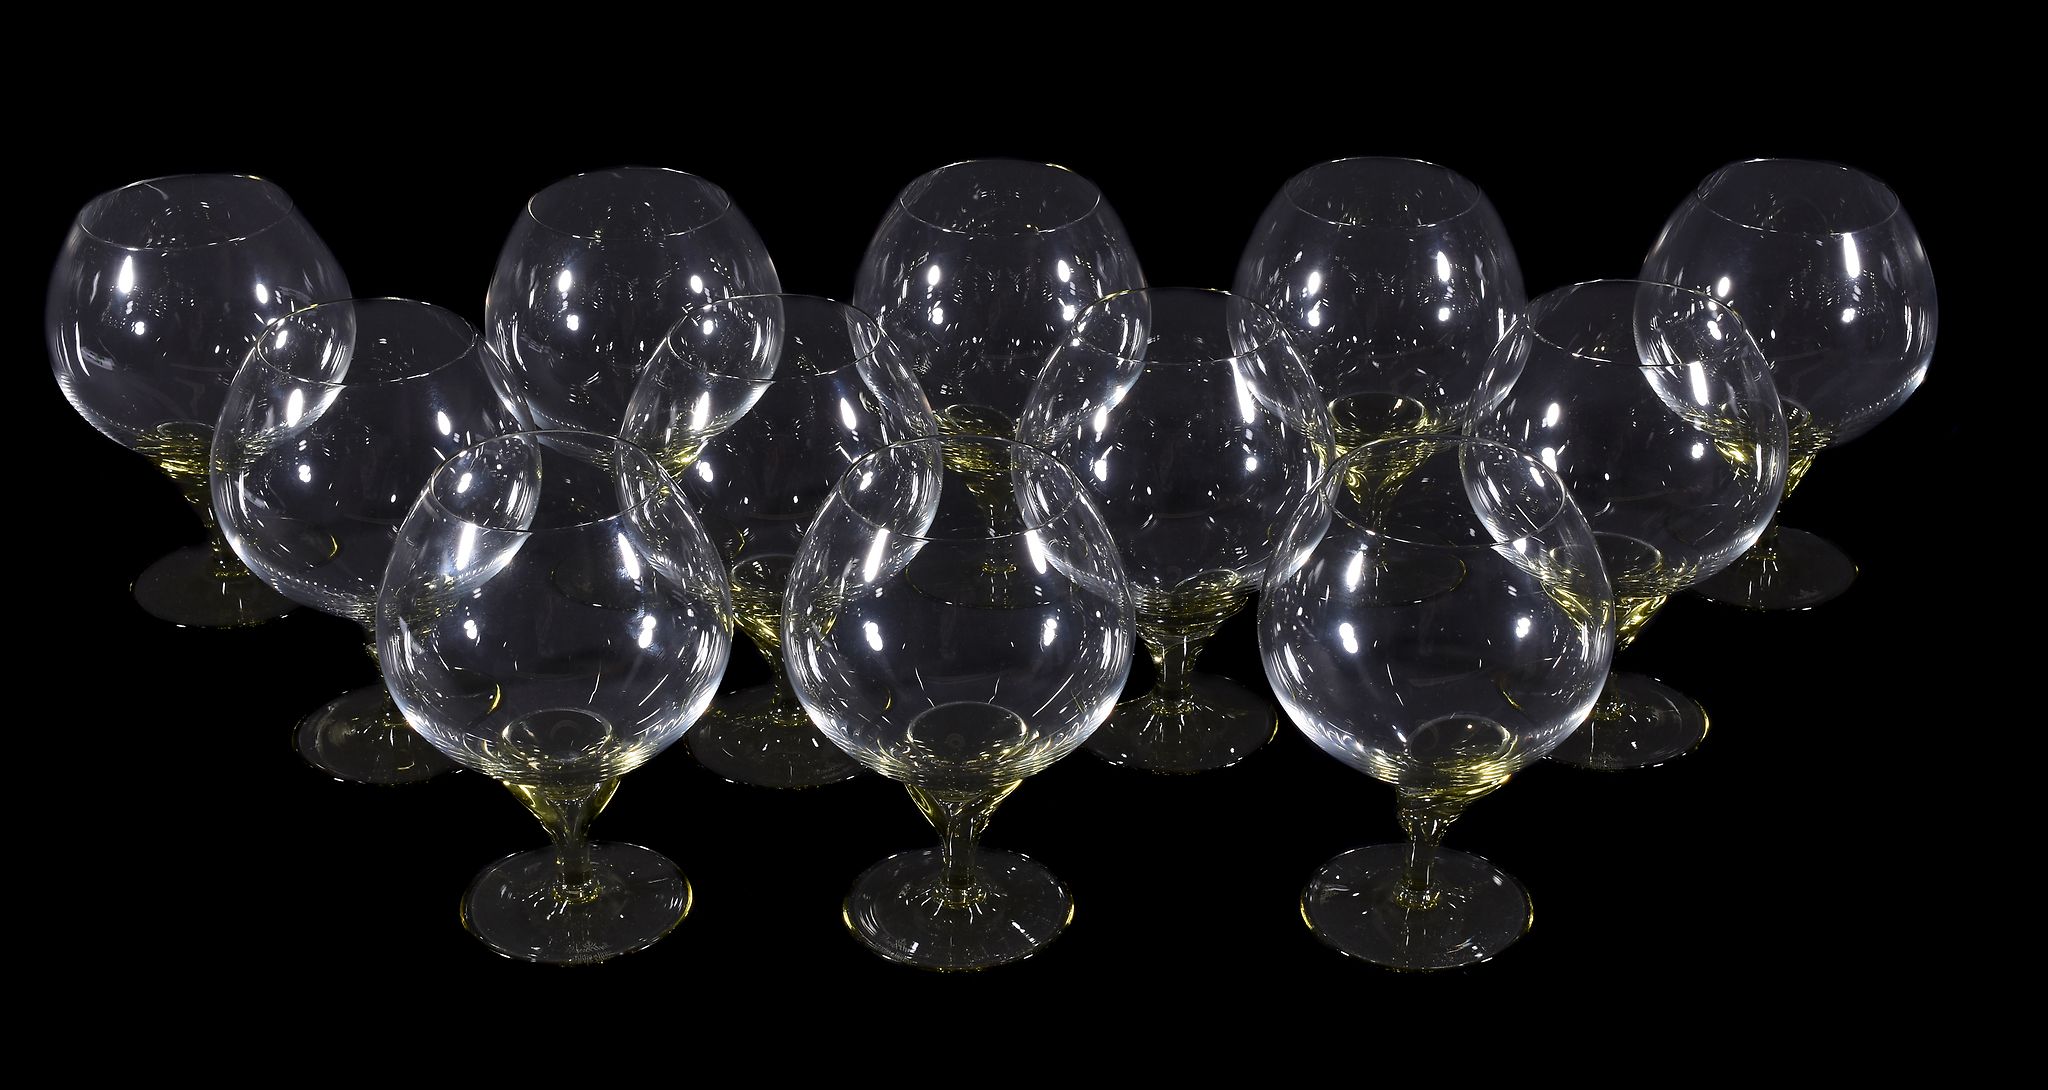 Twelve modern Rosenthal Studio Linie brandy balloon glasses, with pale-green glass stems and